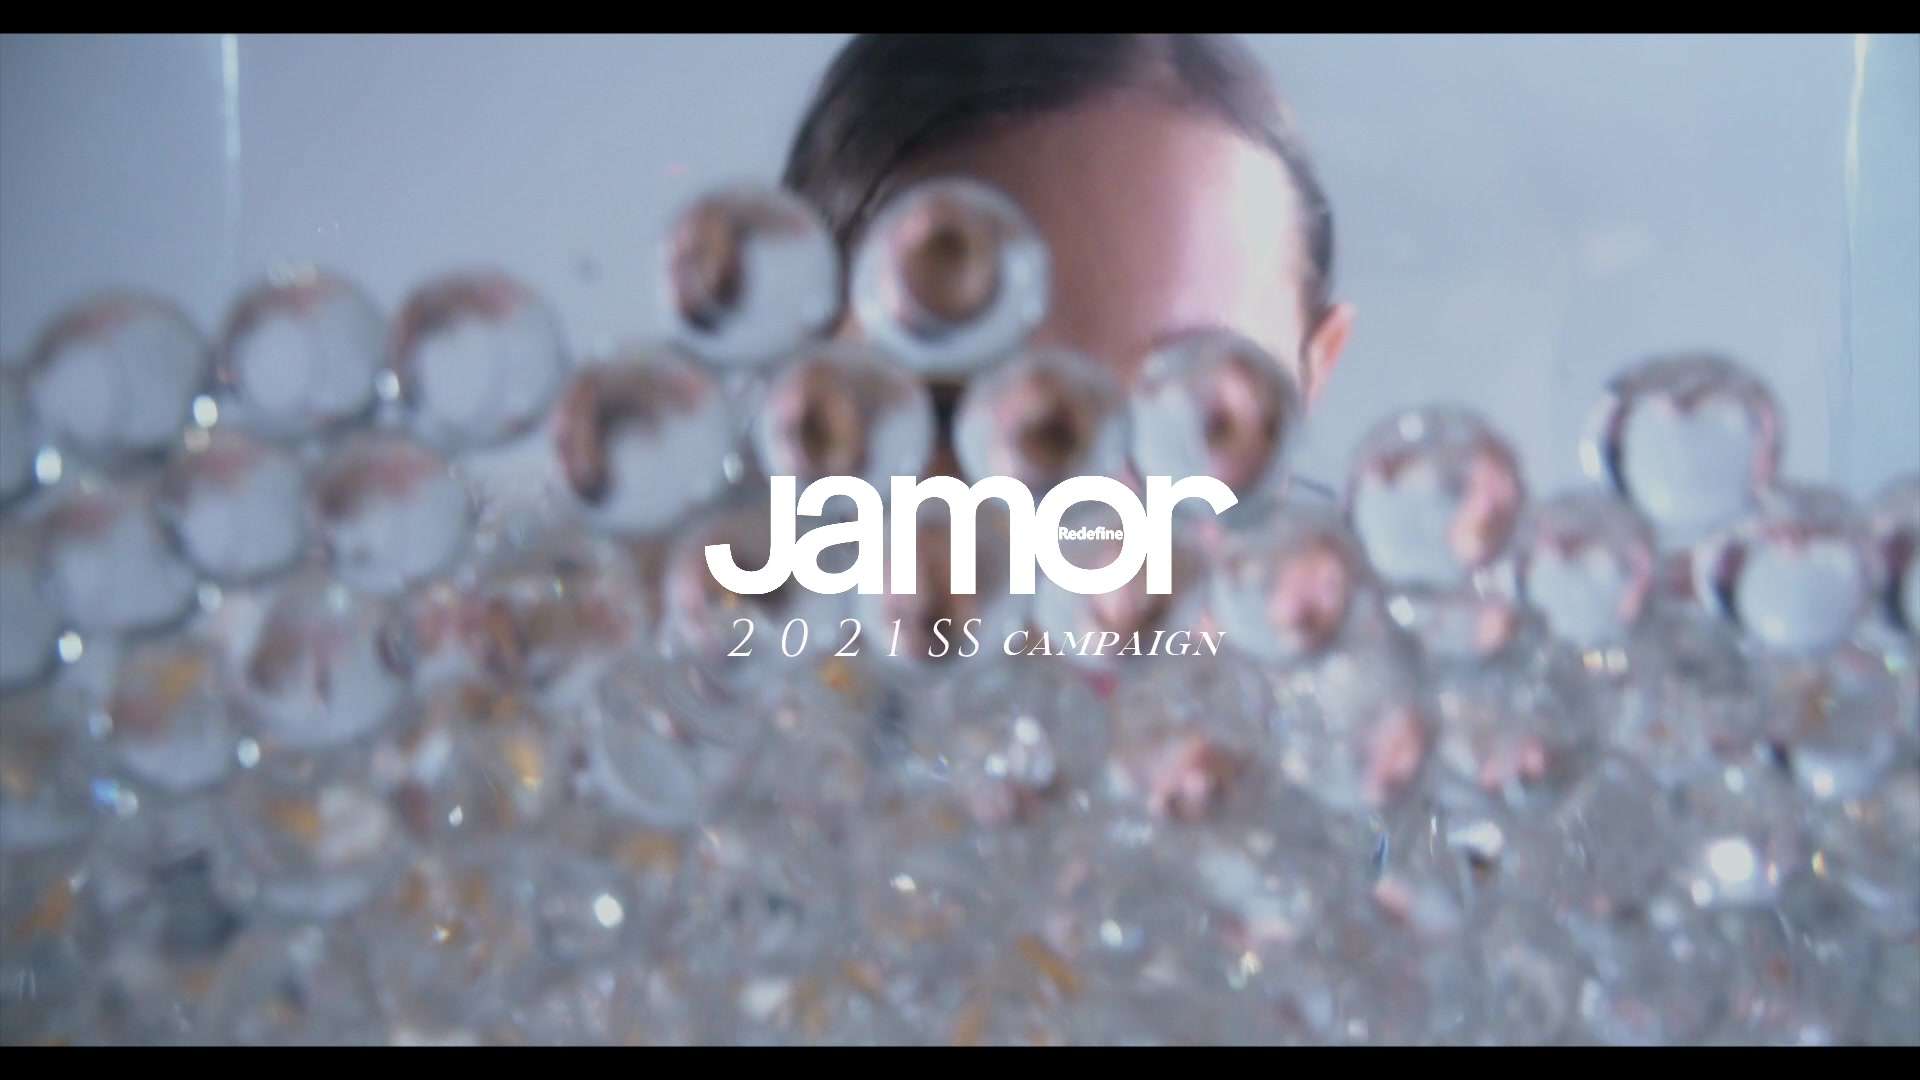 jamor 2021 SS campaign